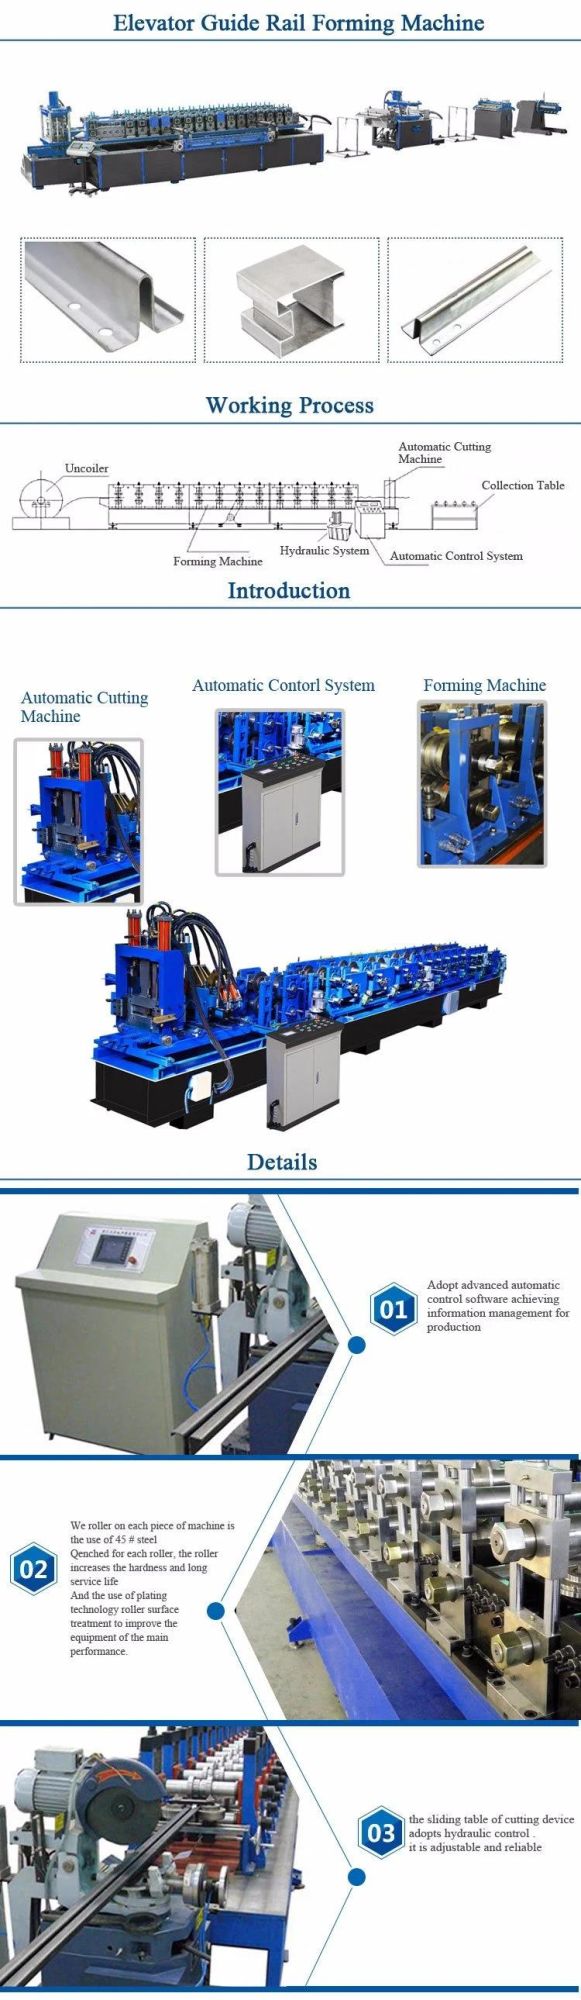 Metal Hollow Fishplate T Shaped Type Profiles Escalator Elevator Guide Rail Cold Drawn/Drawing Roll Making Forming Machine Processing Production Line